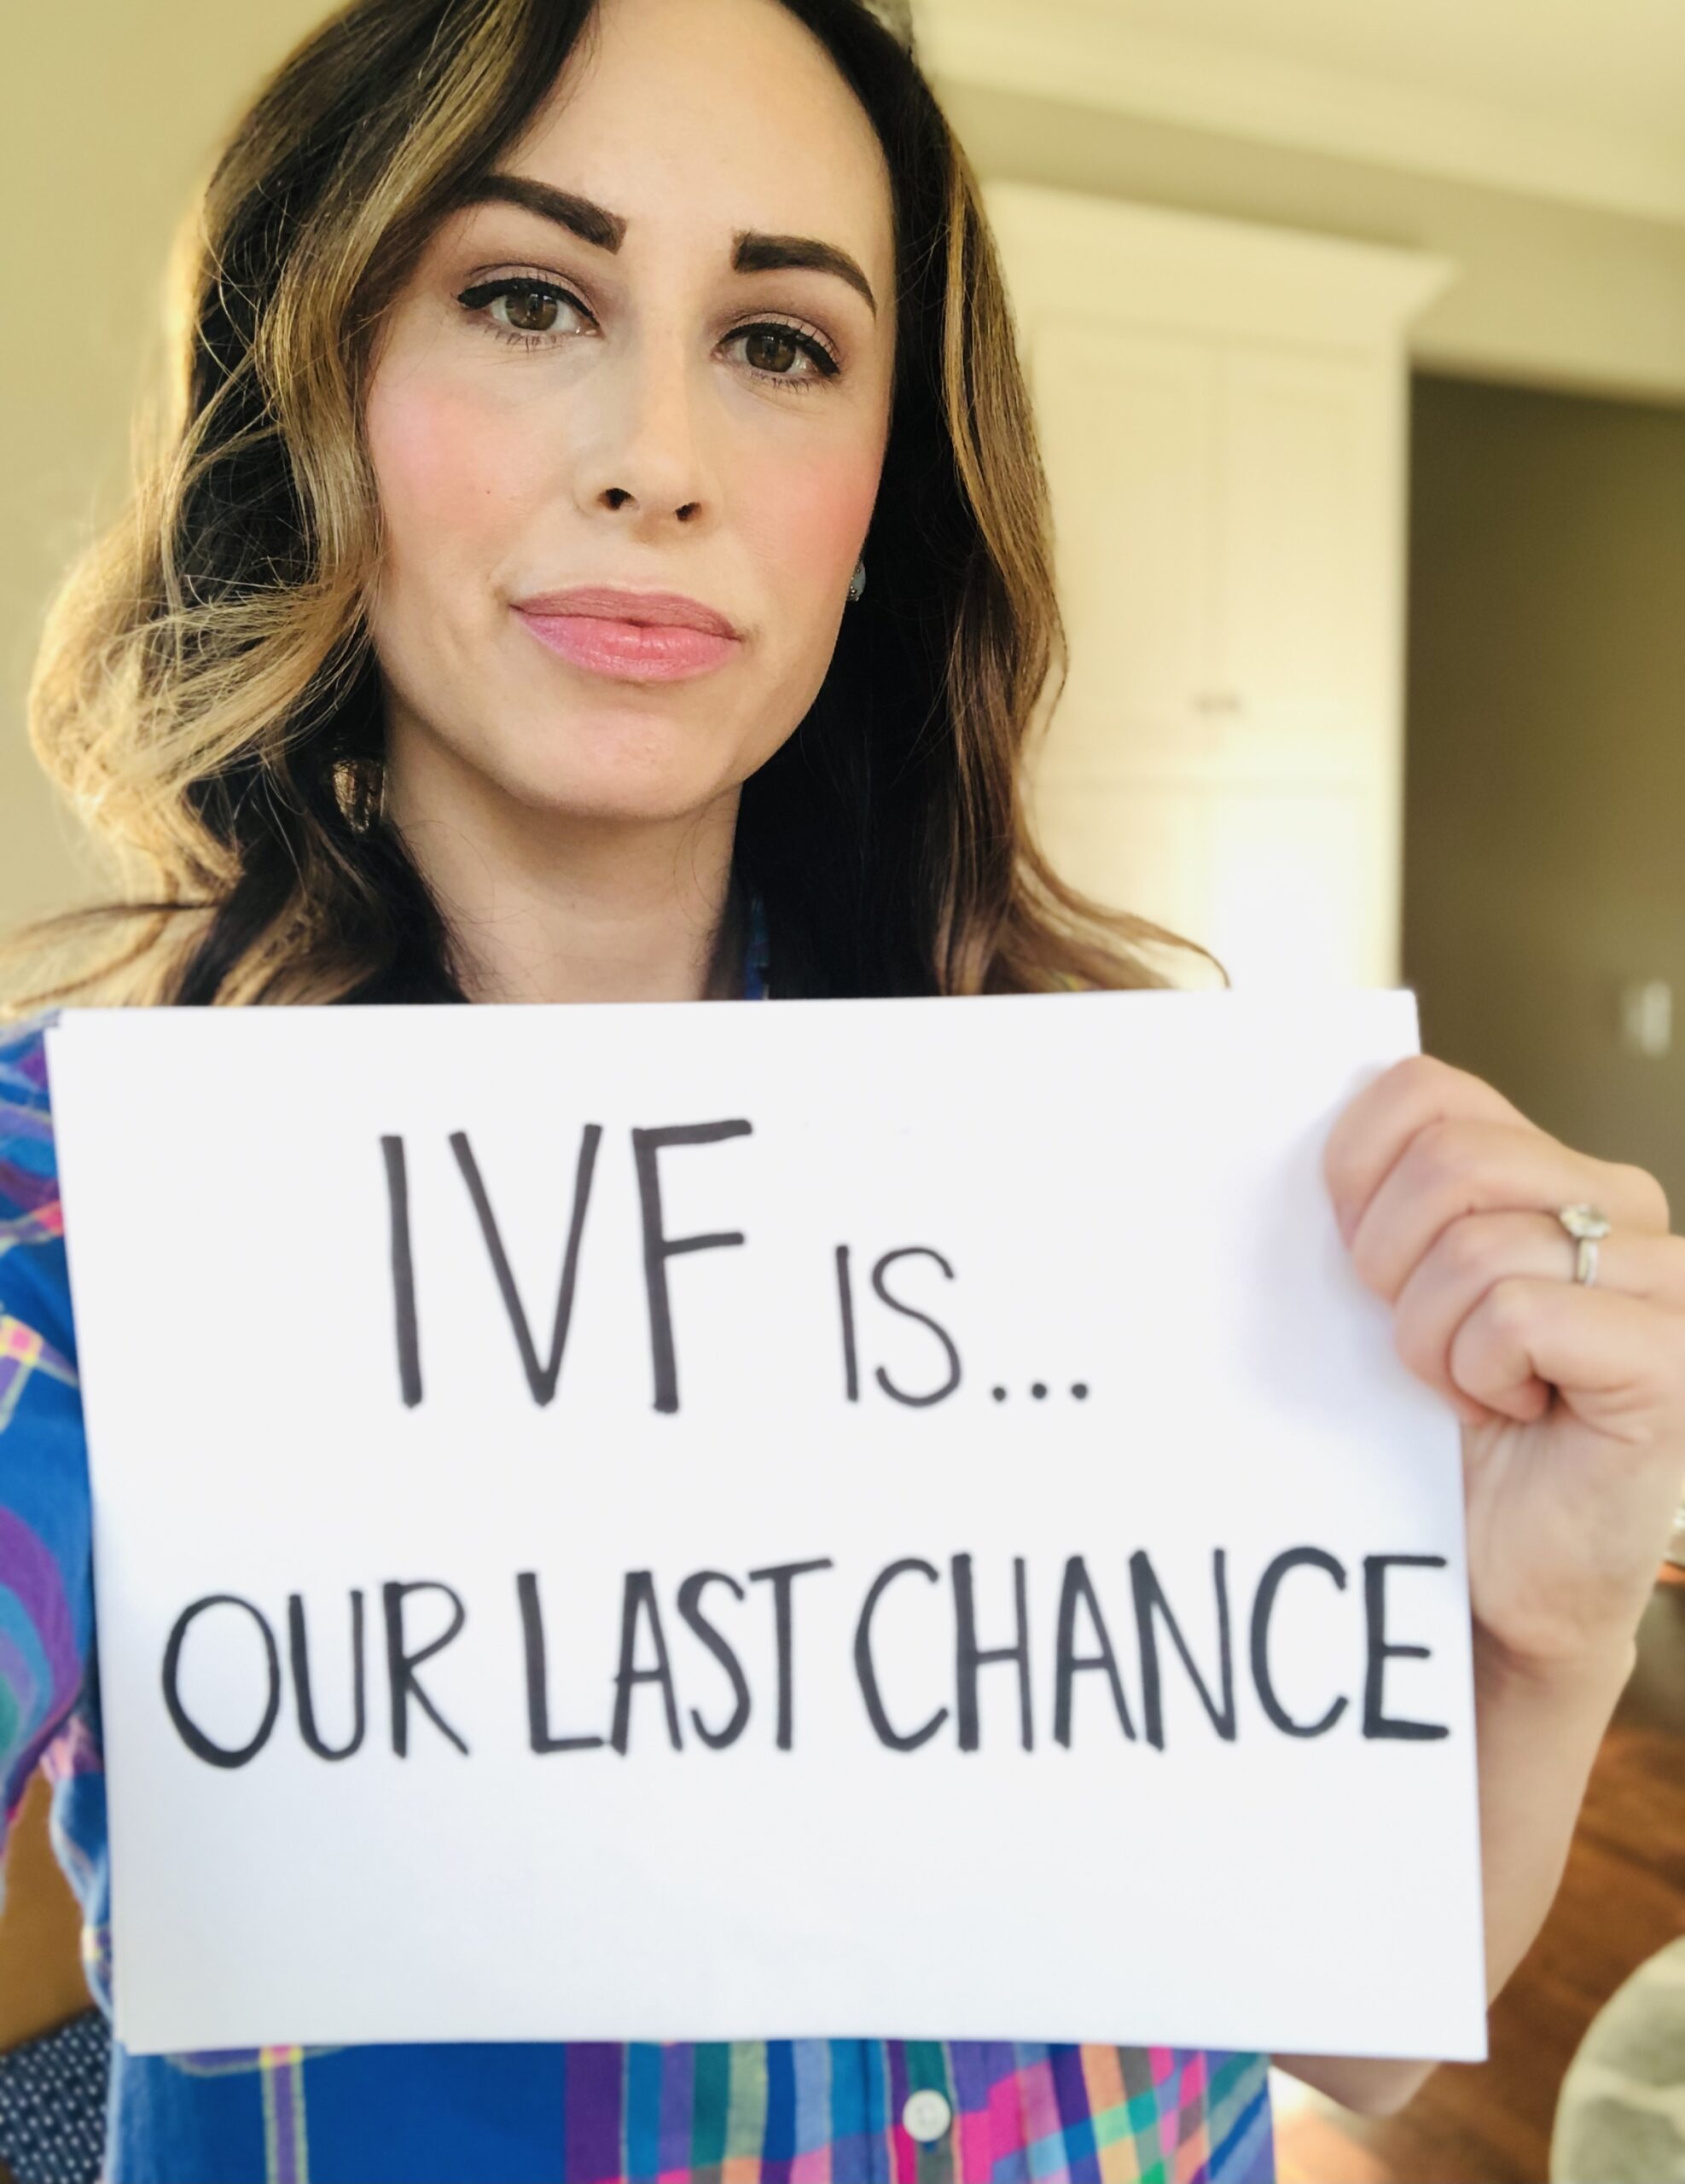 IVF is our last chance_Tasia